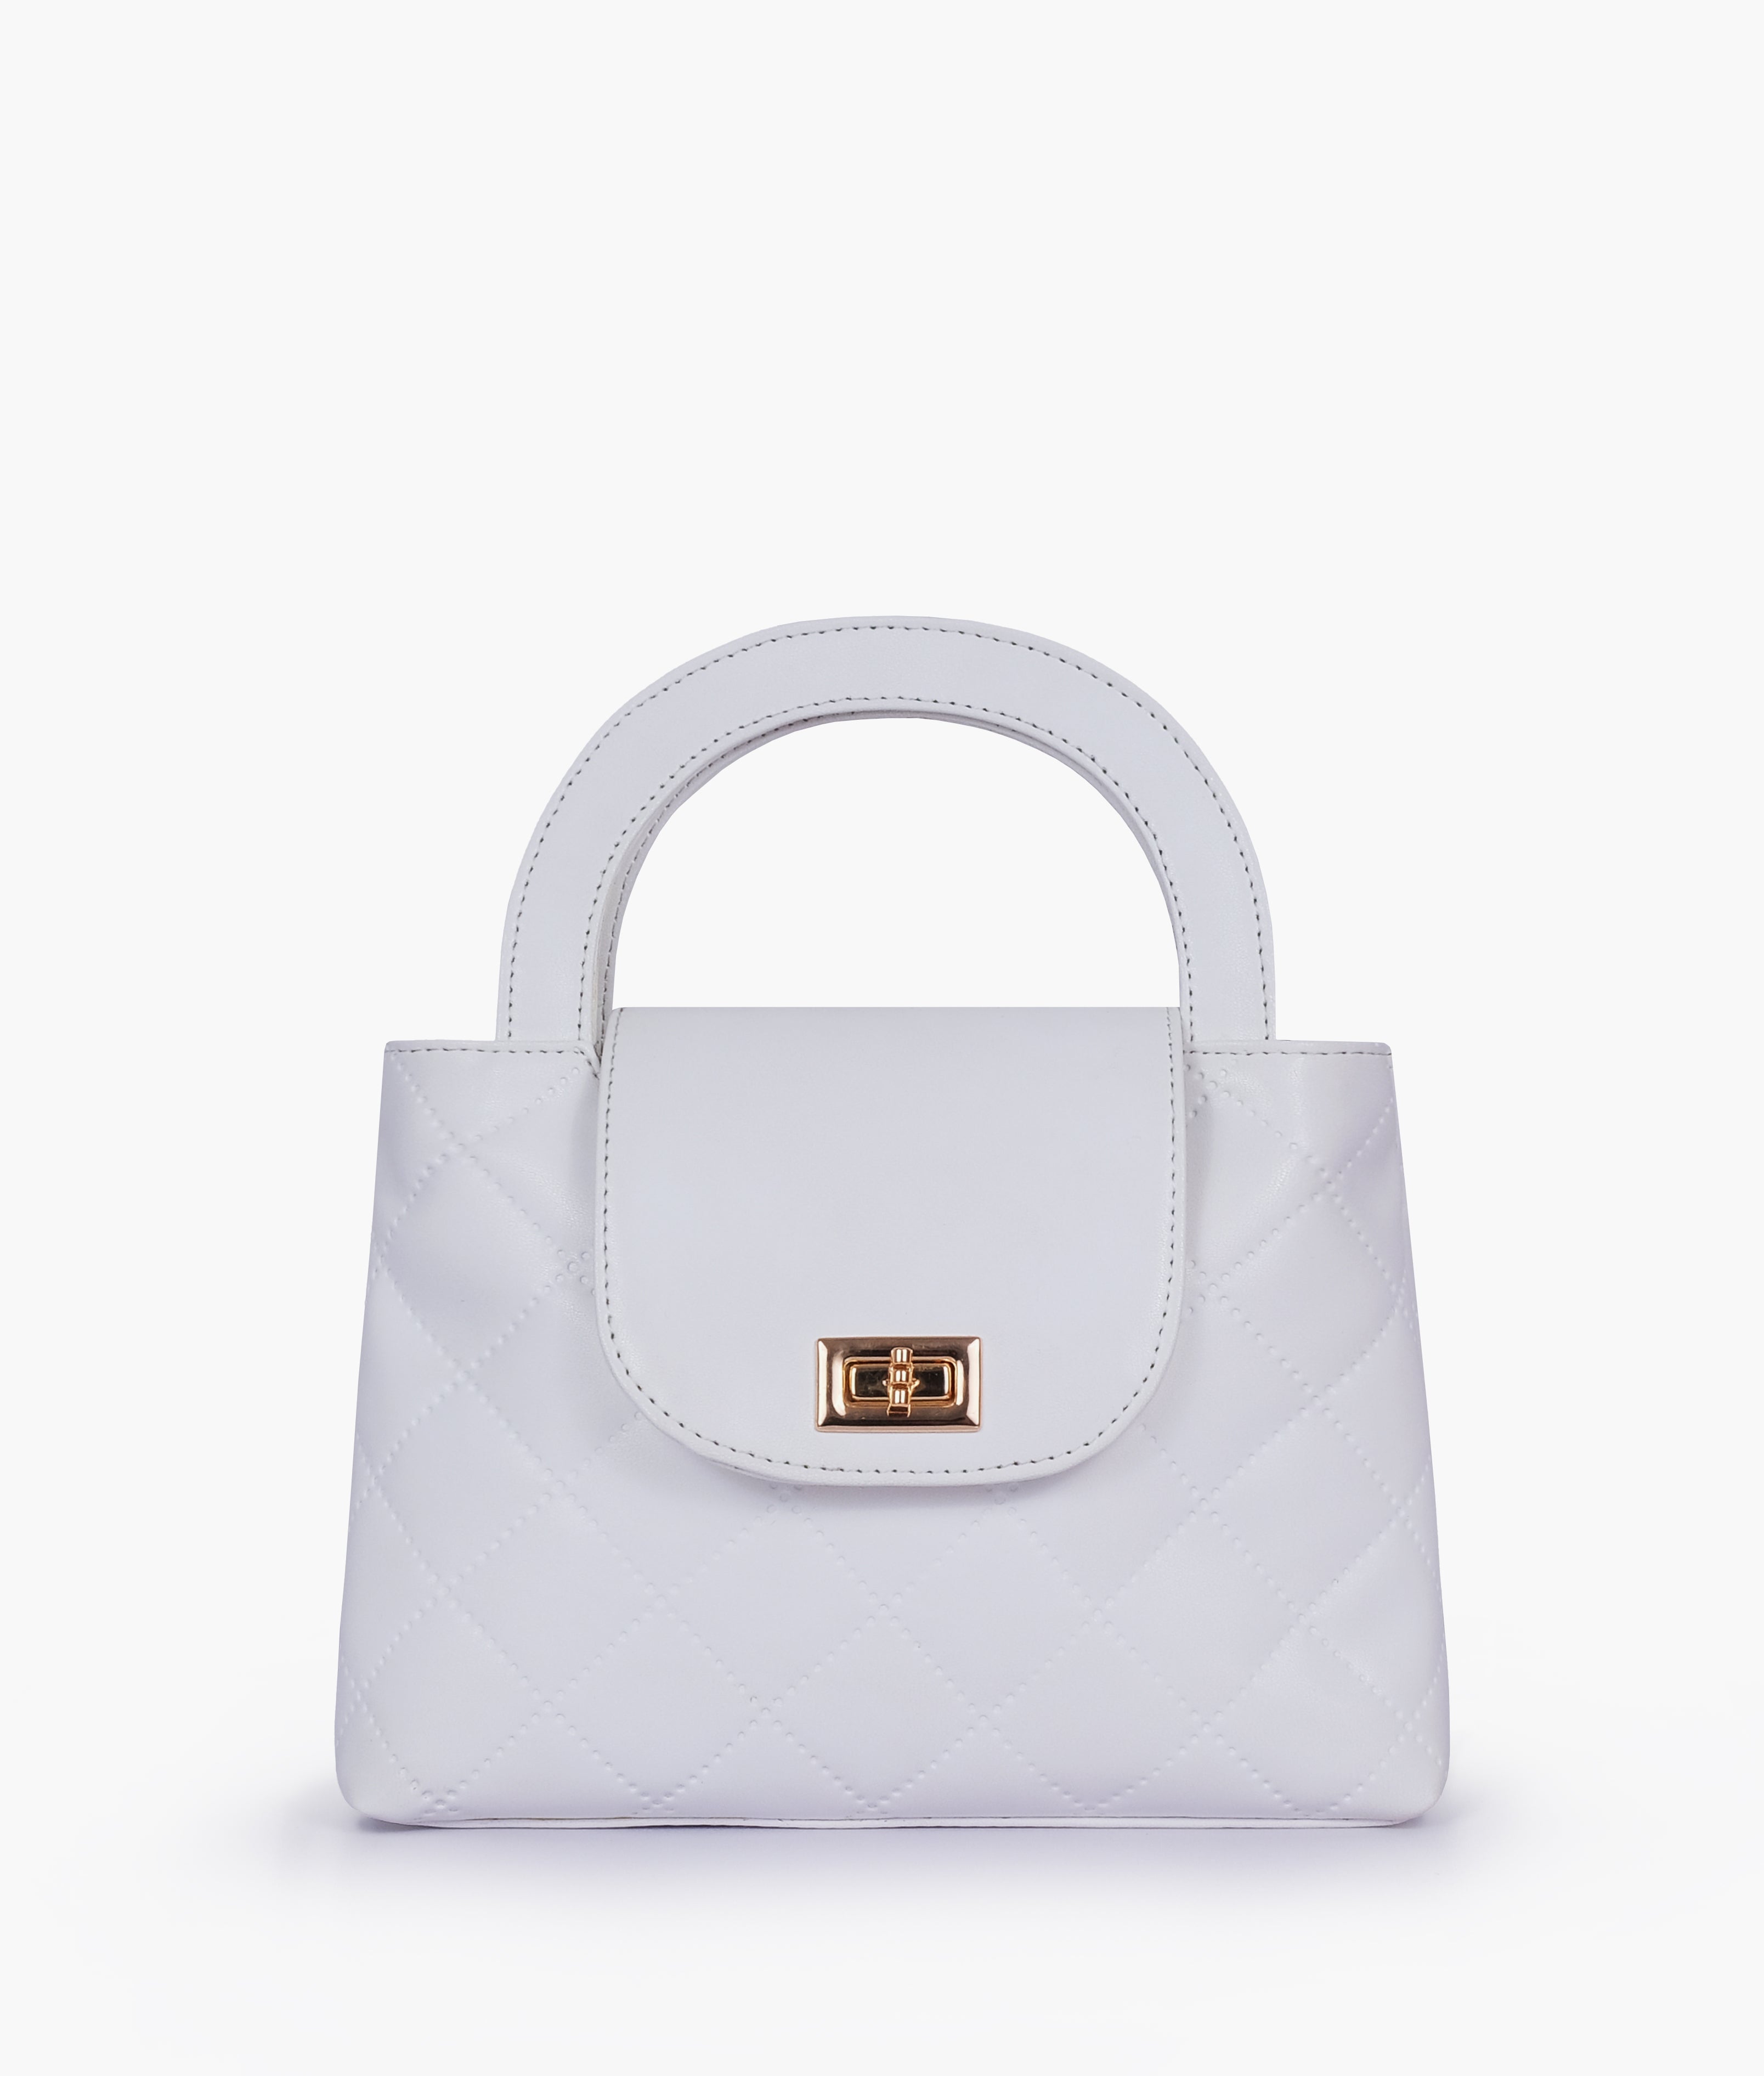 White flap quilted bag with top handle